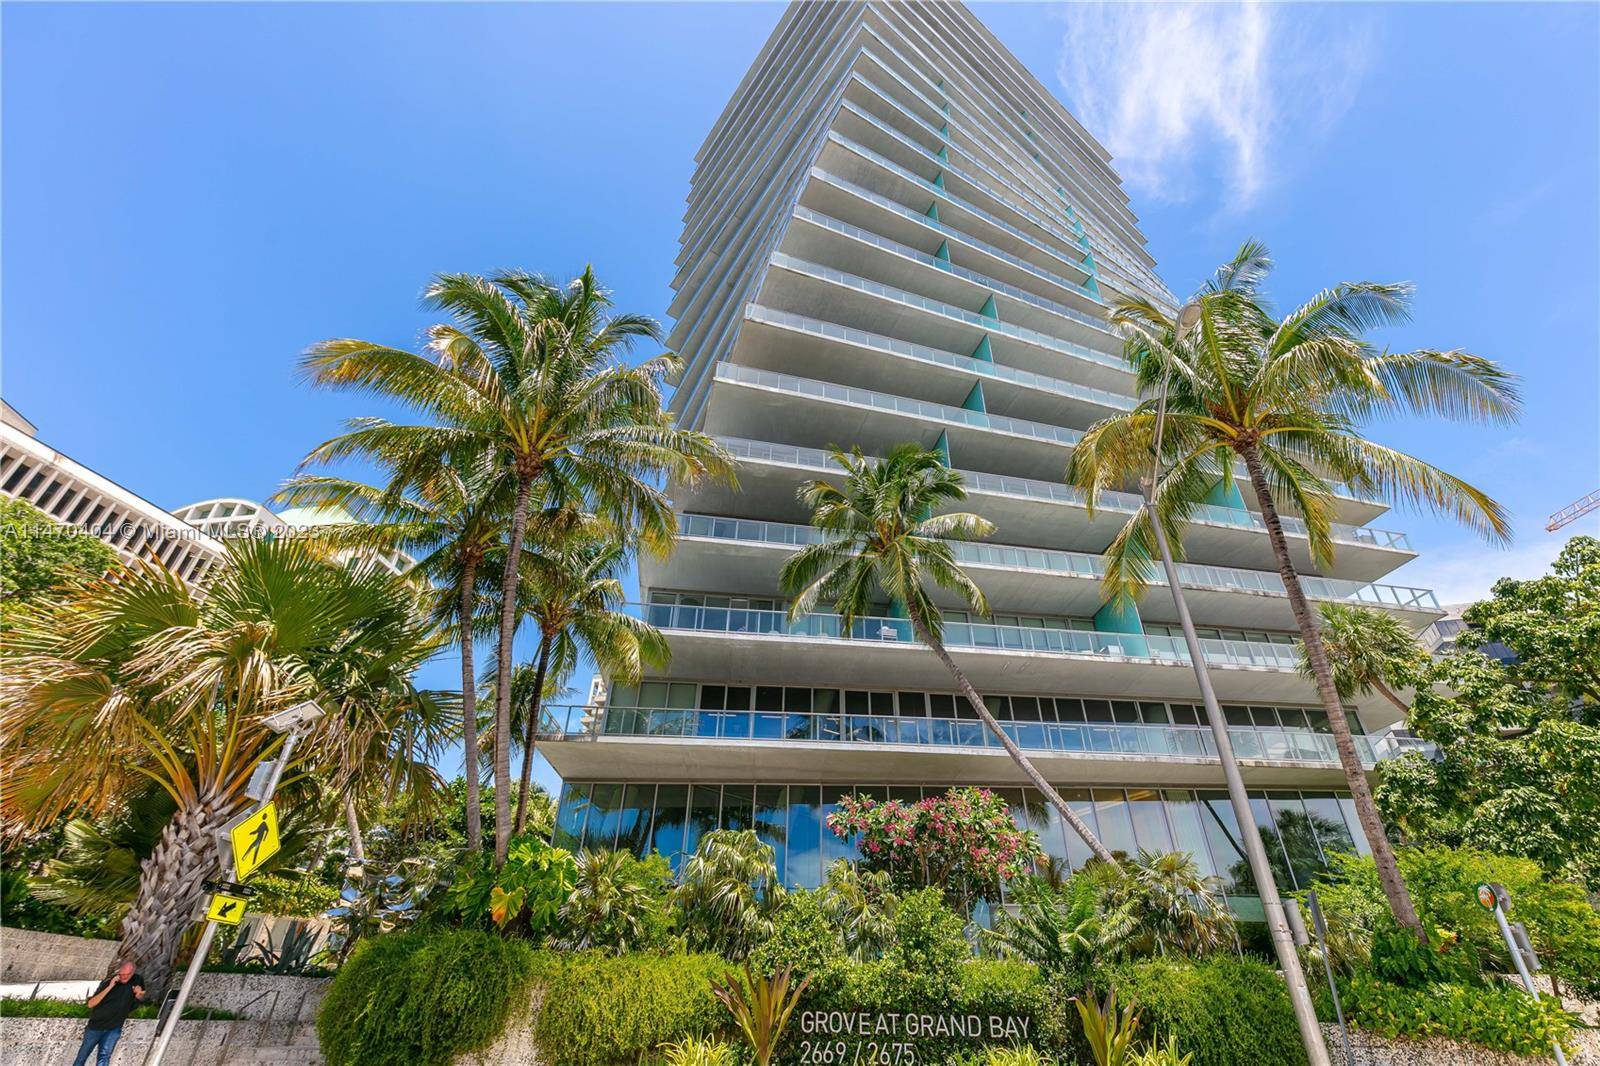 Welcome to Grove at Grand Bay in the heart of the Village of Coconut Grove.